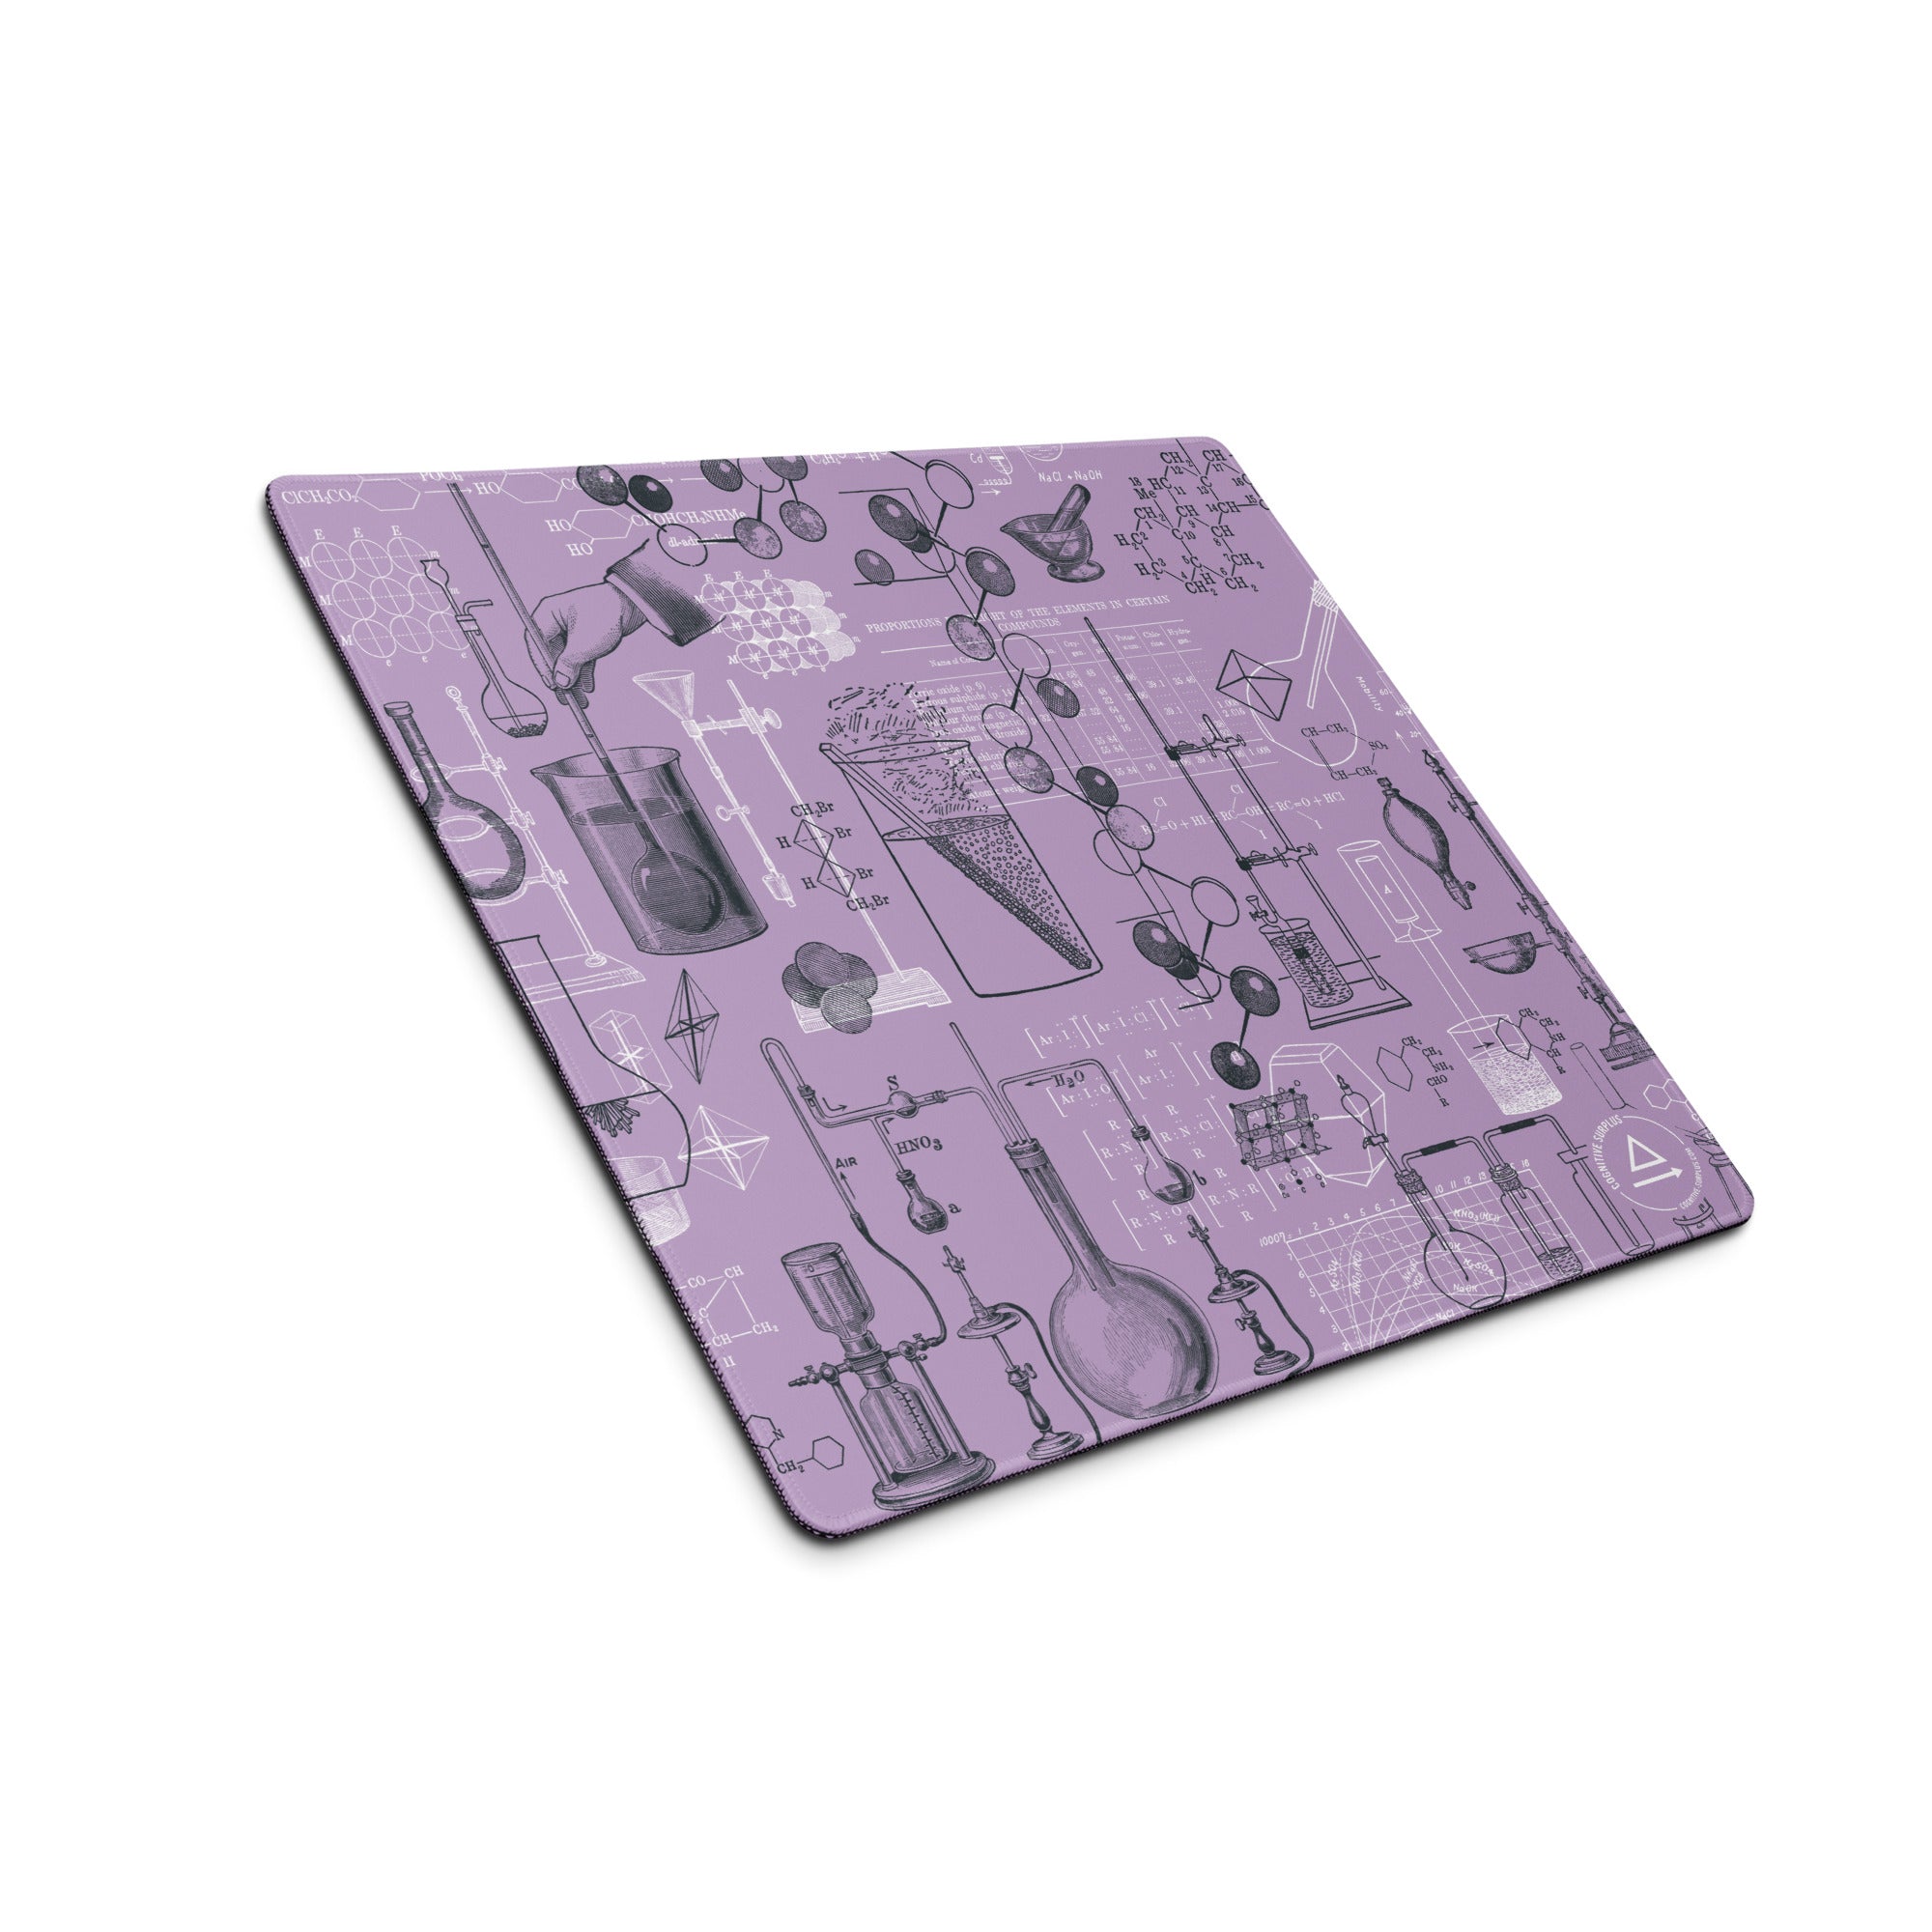 gaming-mouse-pad-white-18x16-front-6595e7b21c42c.jpg